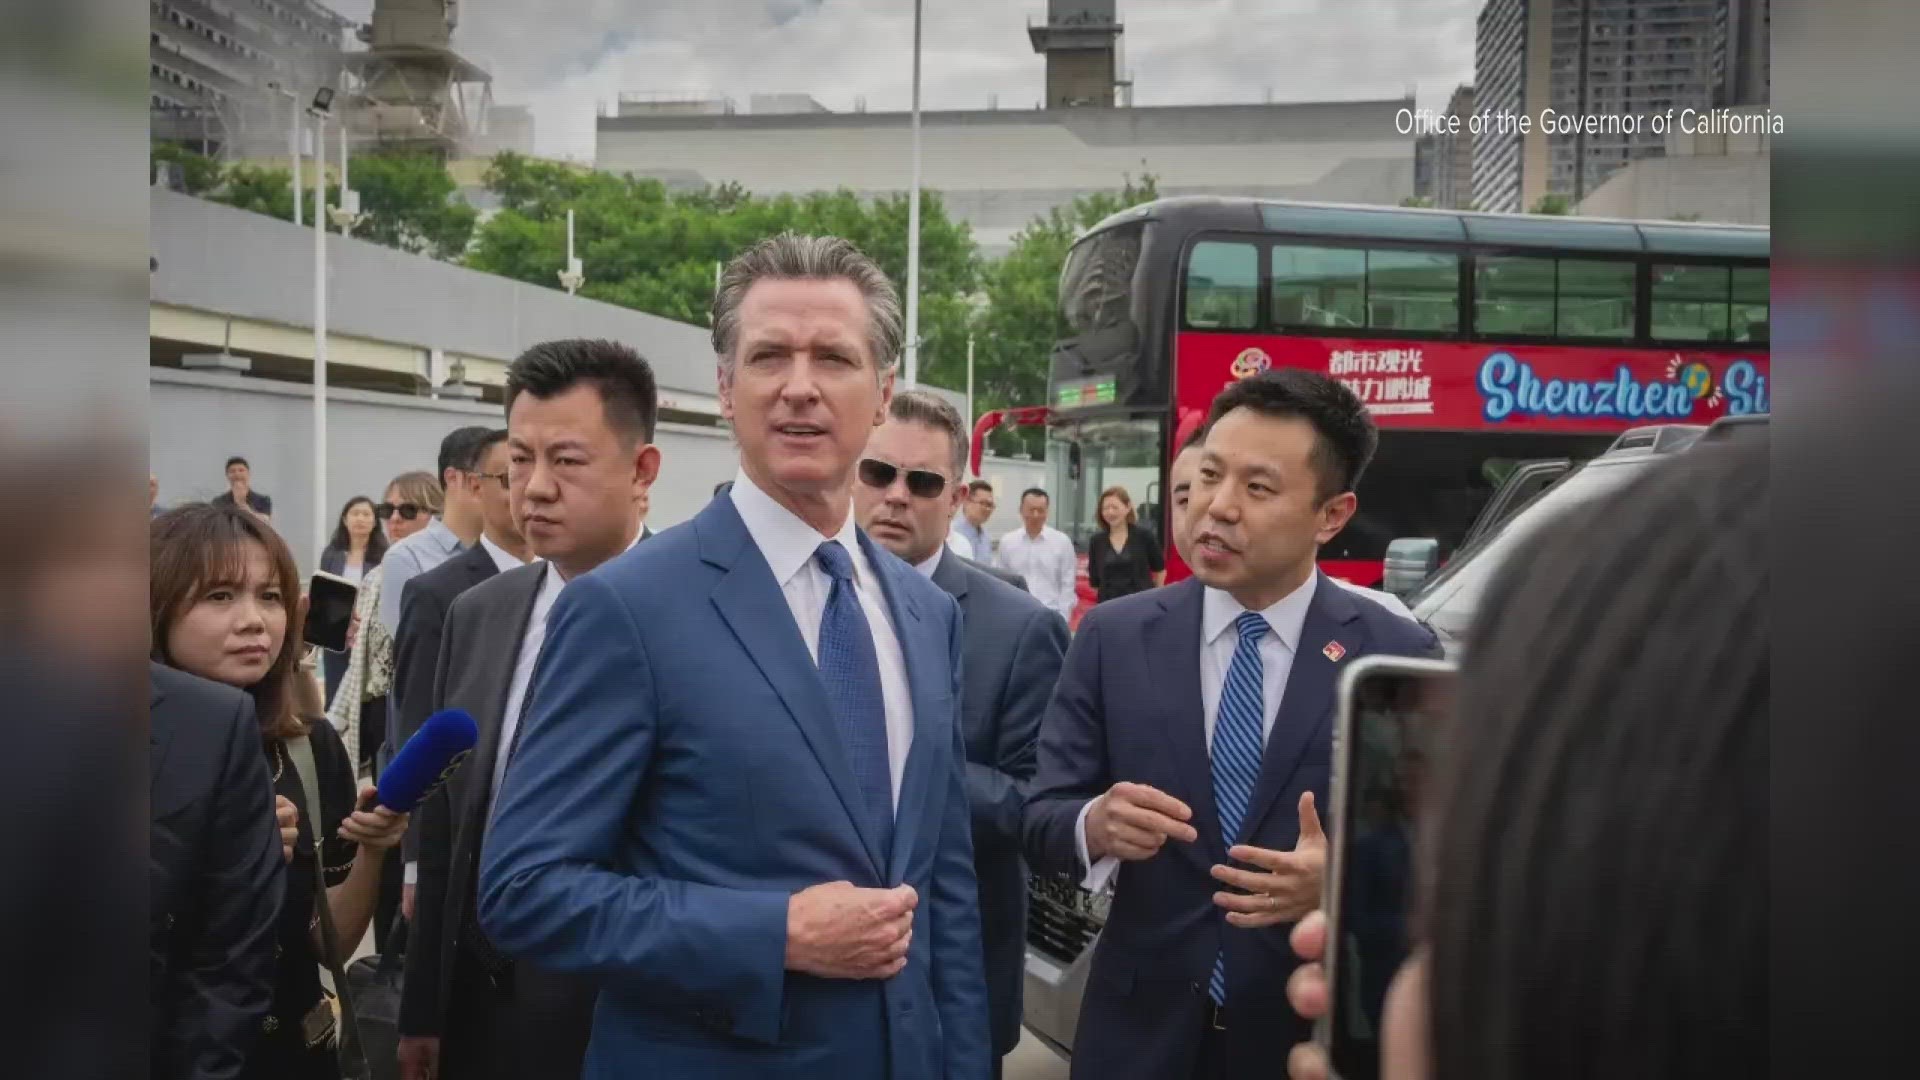 Newsom’s trip to China, with the stated goal of working together to fight climate change, resulted in a surprise meeting with leader Xi Jinping.